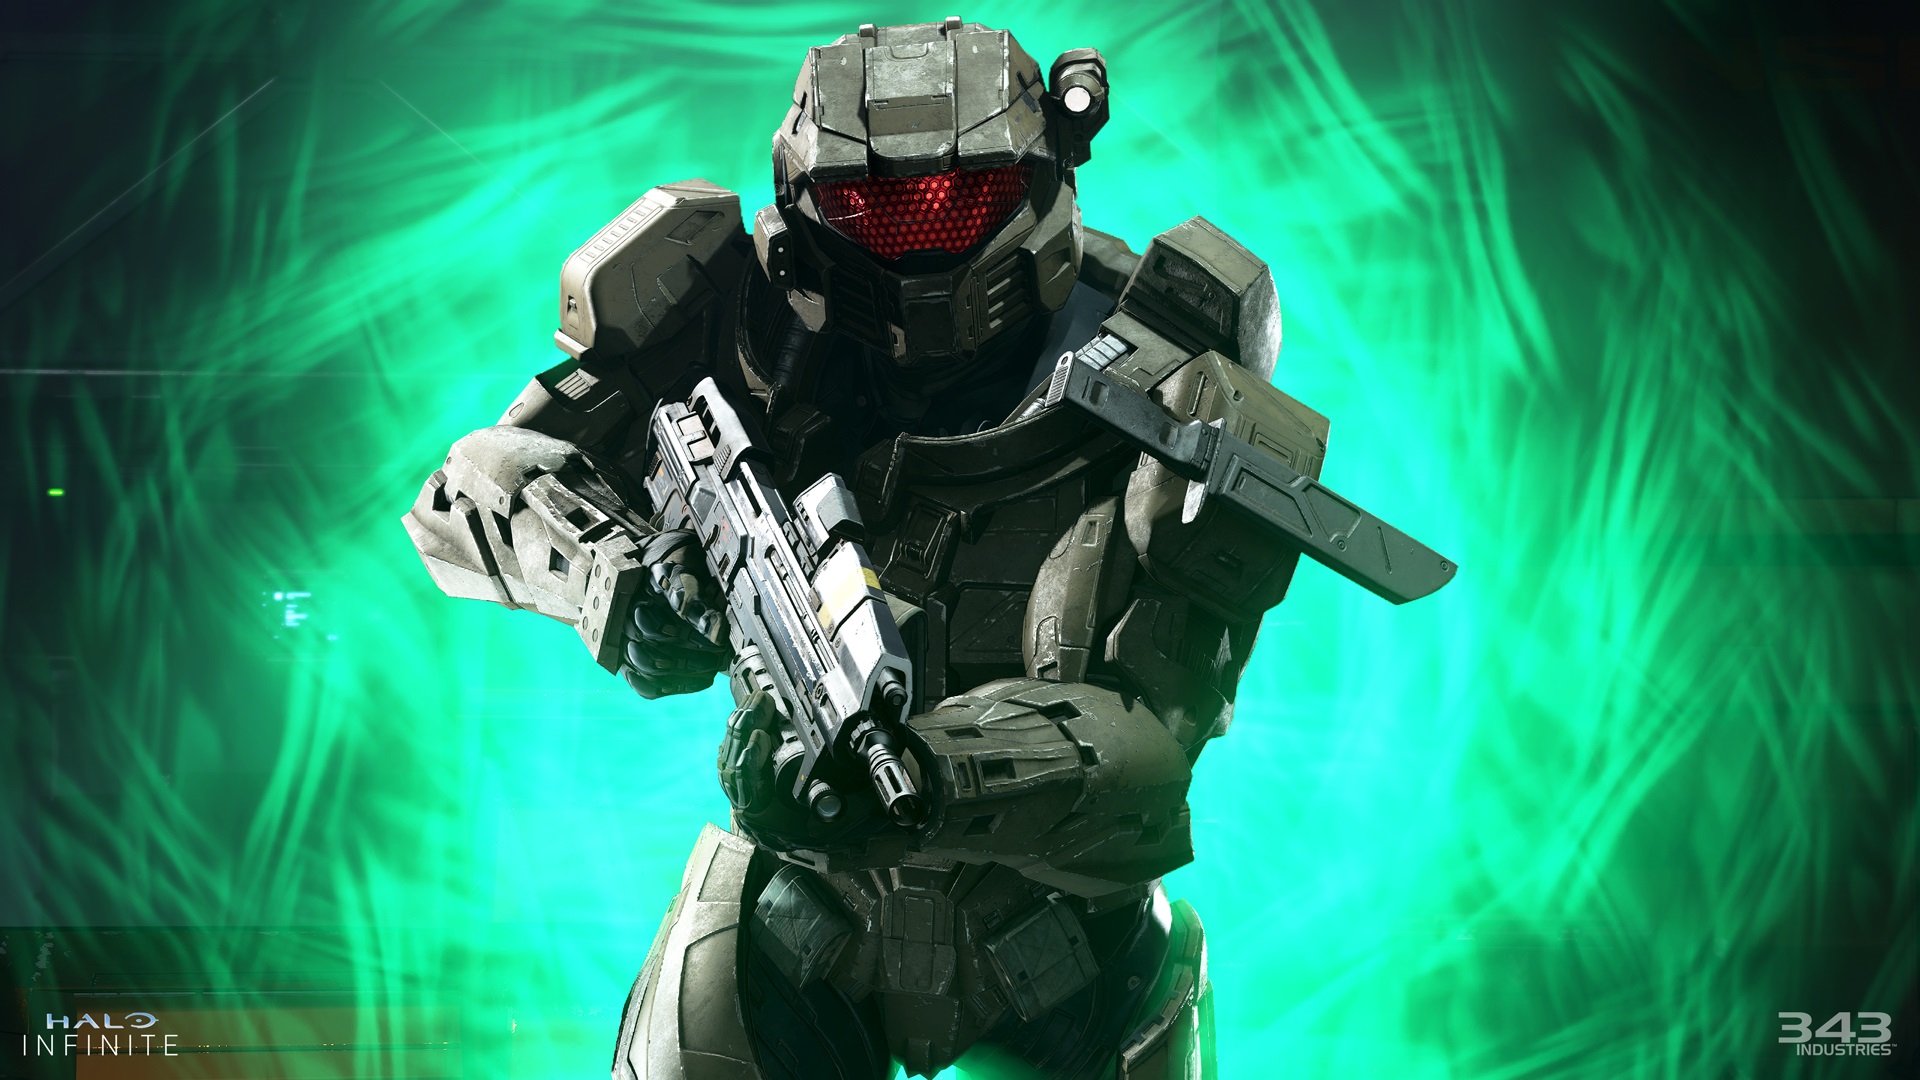 Halo Infinite screenshot of a Spartan in Mark IV armor holding an Assault Rifle with the Evolved MA5 weapon model